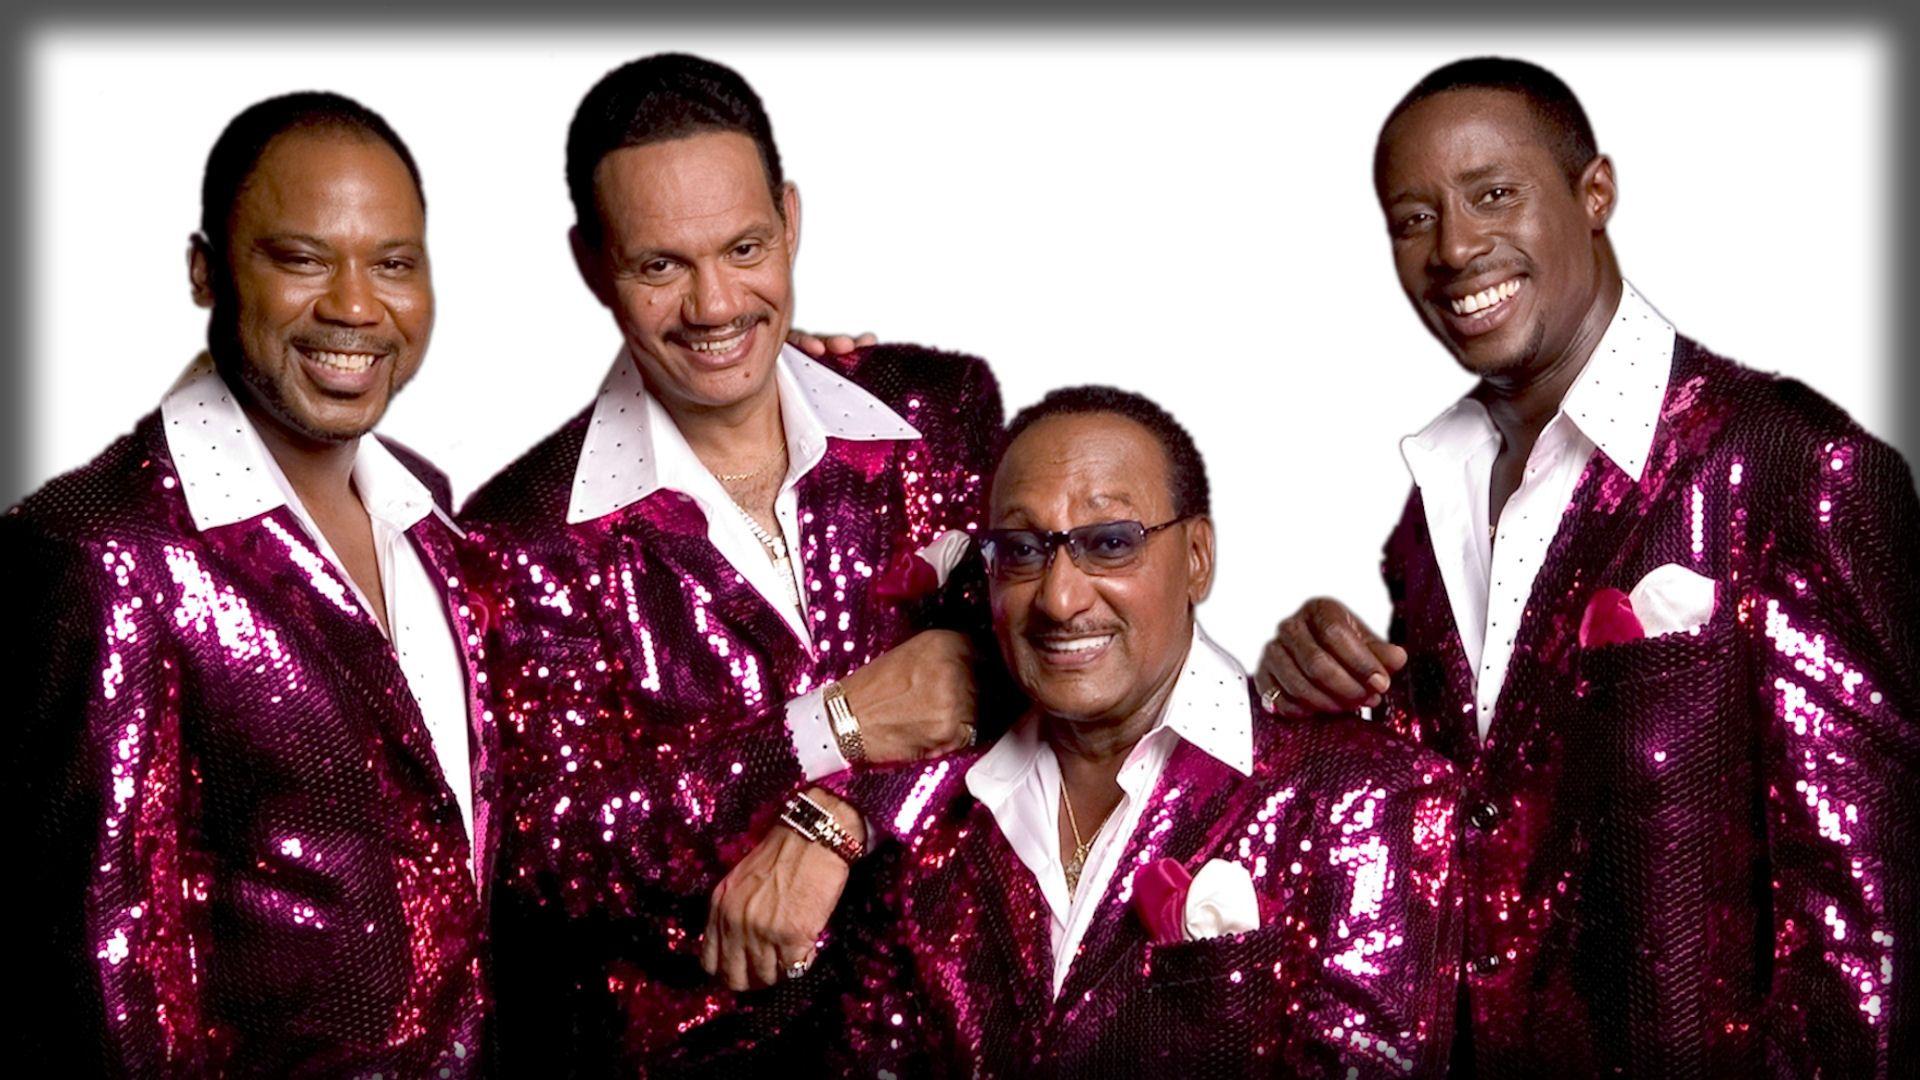 Download Wallpaper 1920x1080 The temptations, Costumes, Smile